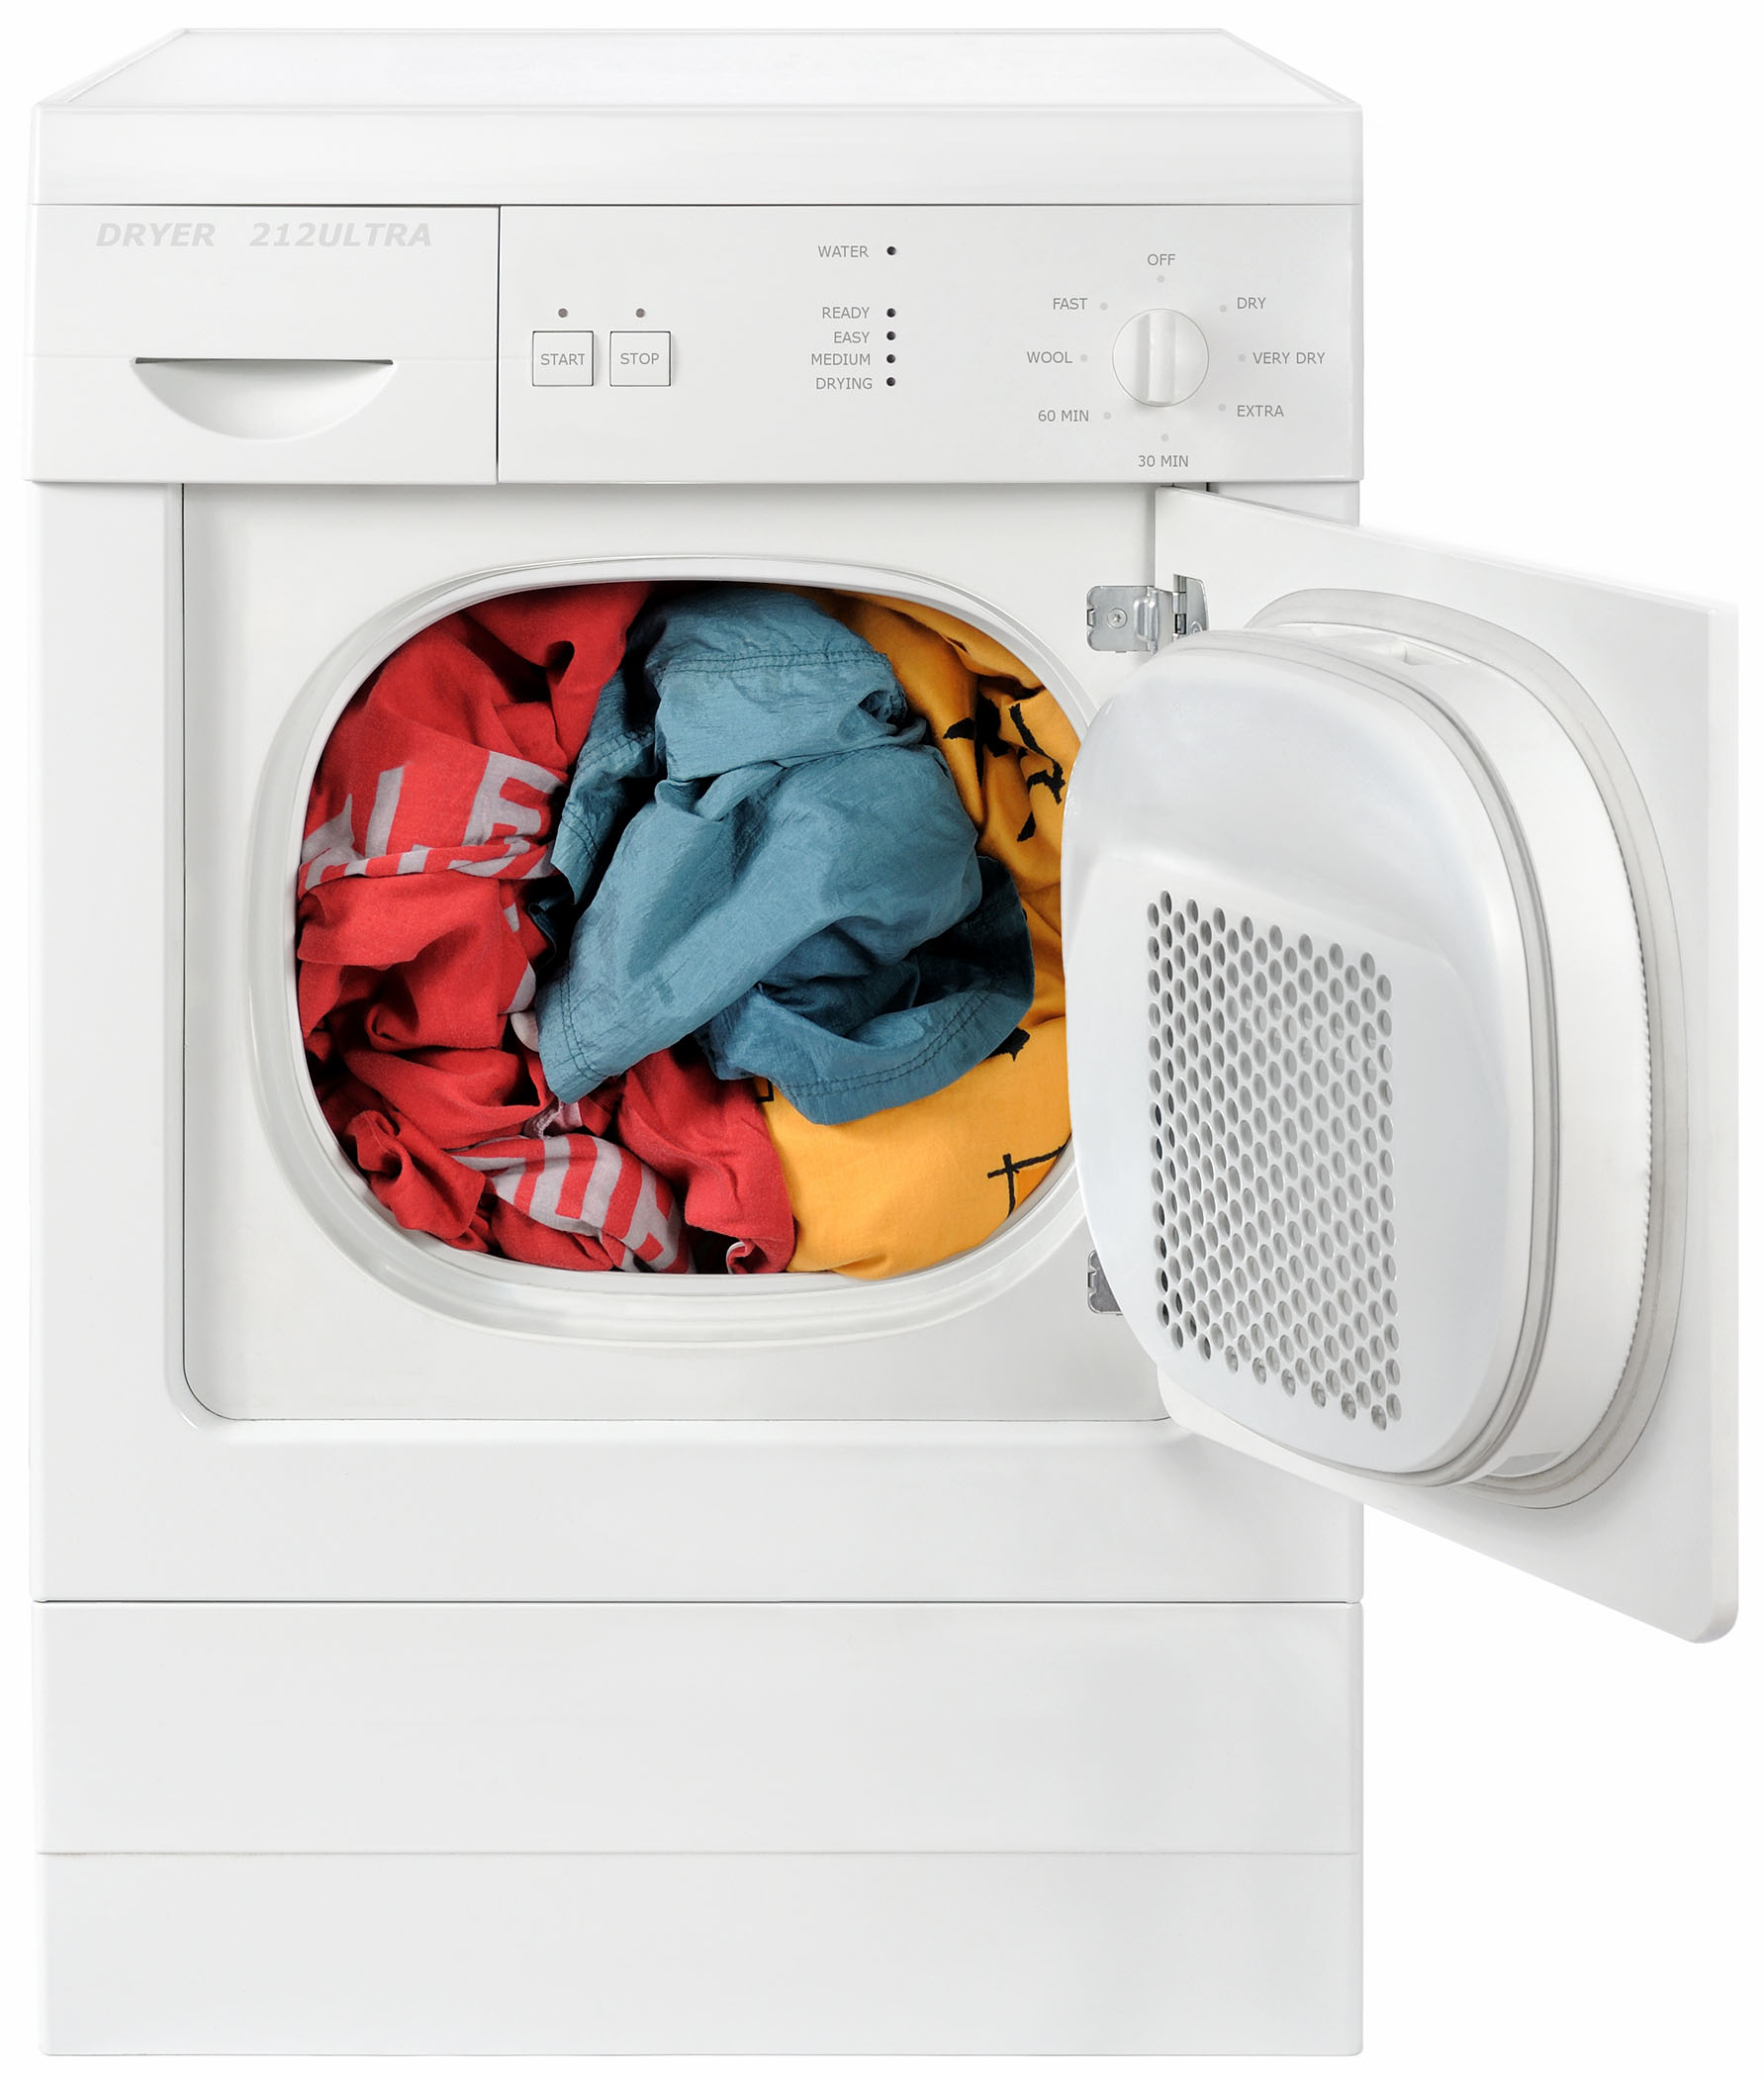 Clothes dryers image